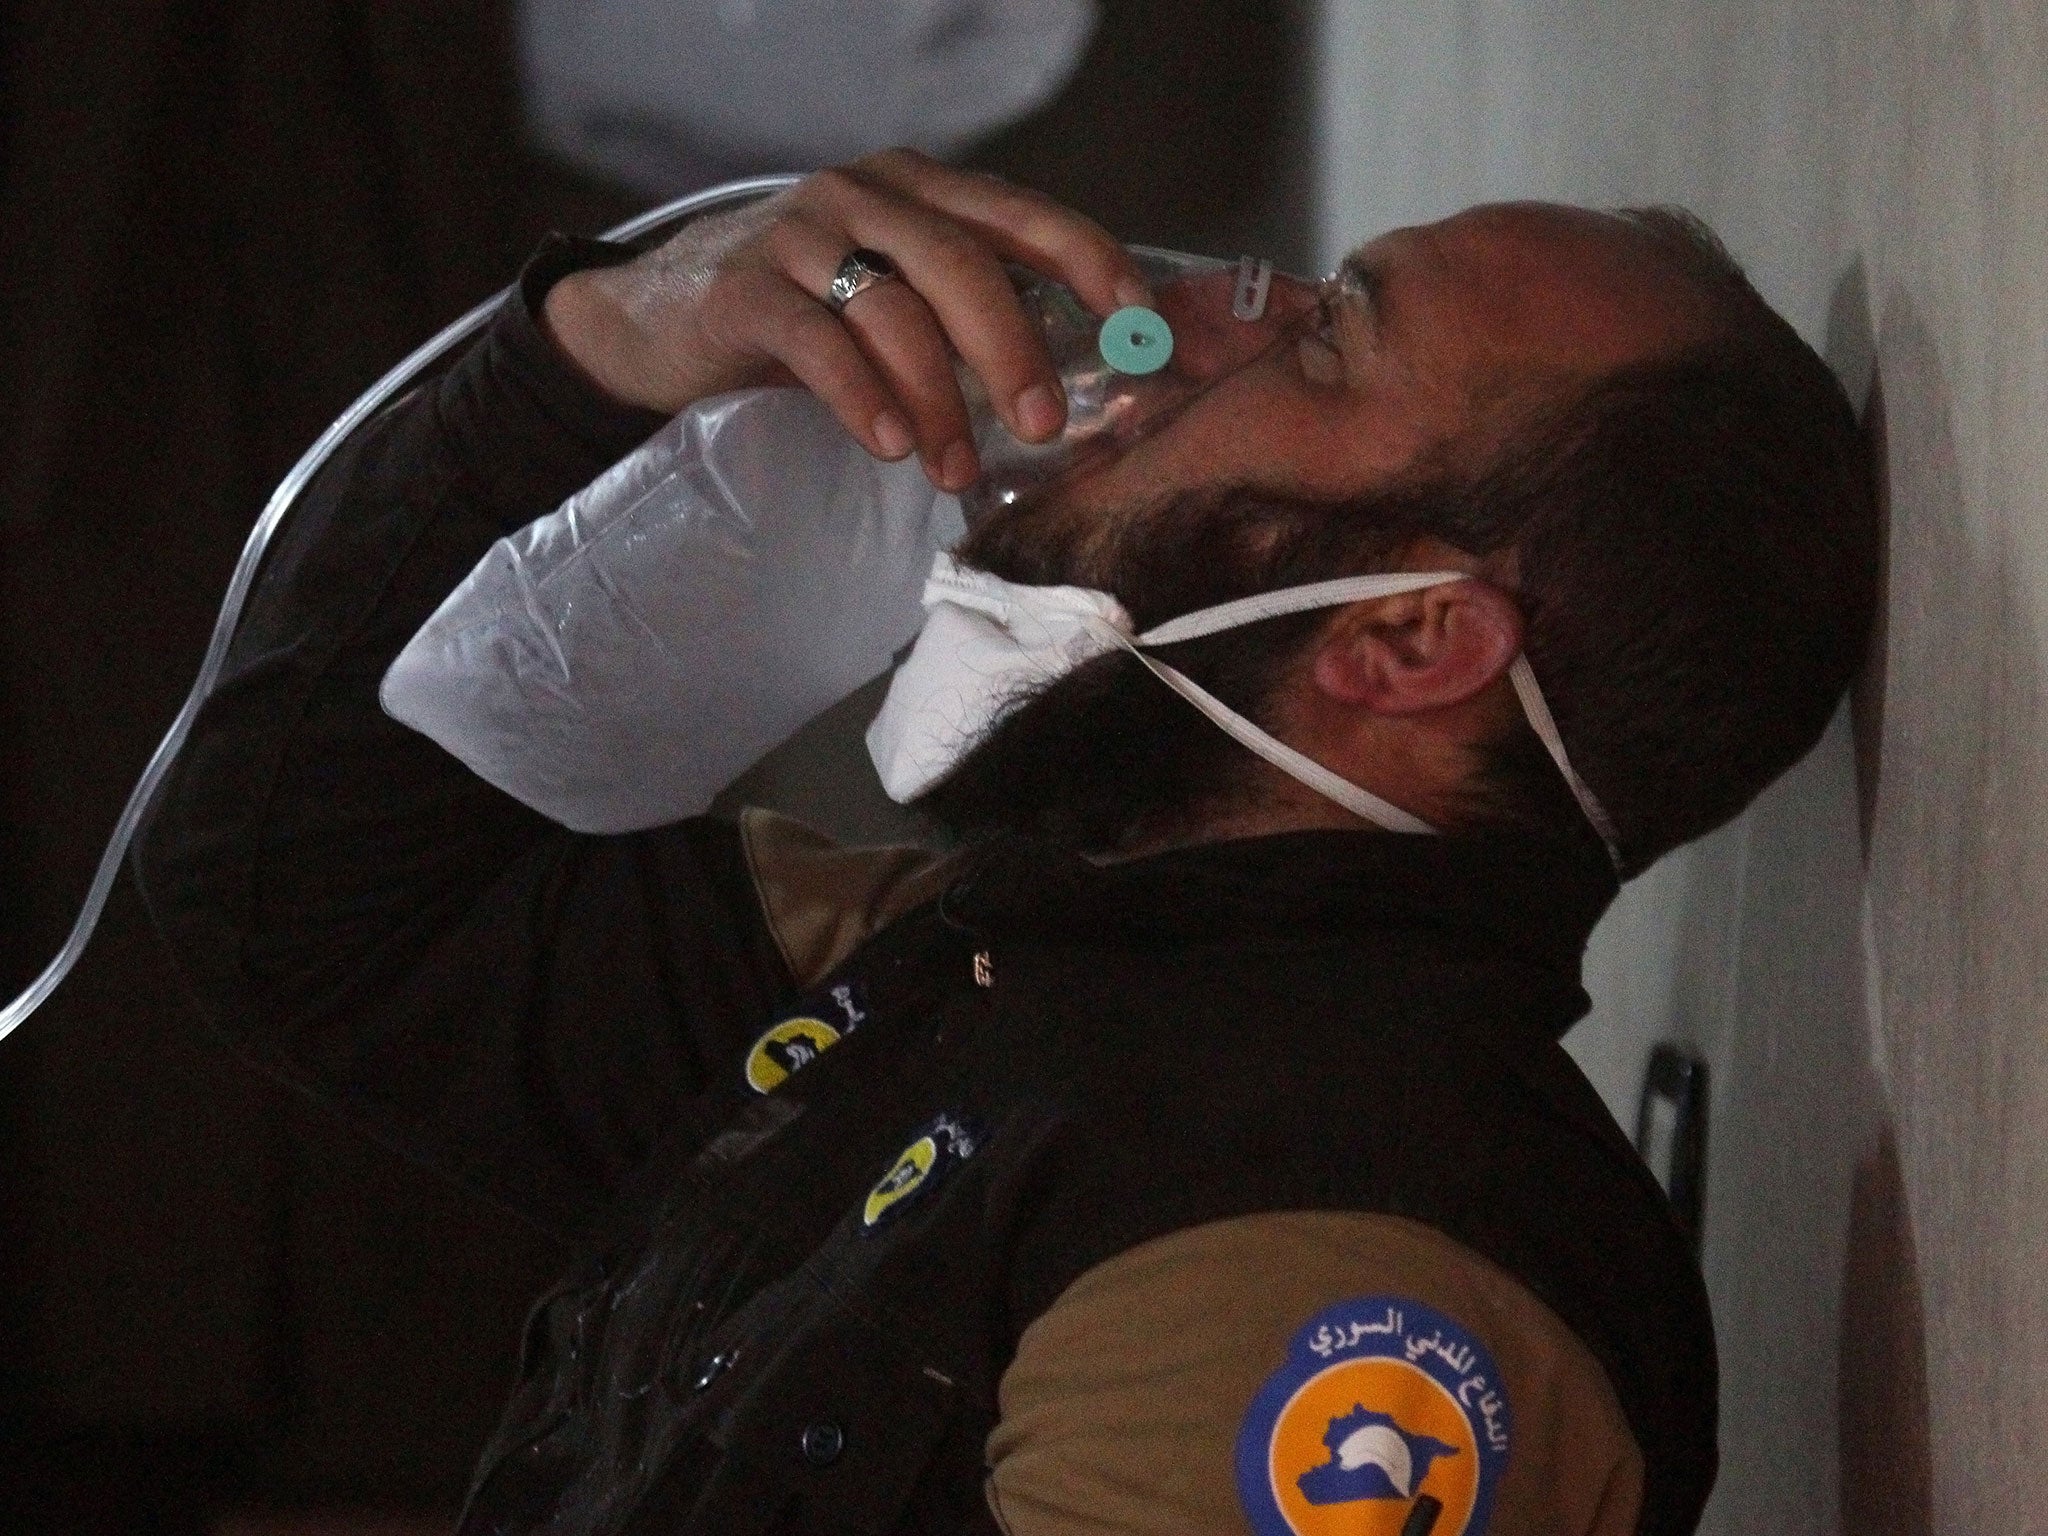 A White Helmets rescuer breathes through an oxygen mask, after a suspected gas attack in the town of Khan Sheikhoun, Idlib, on 4 April